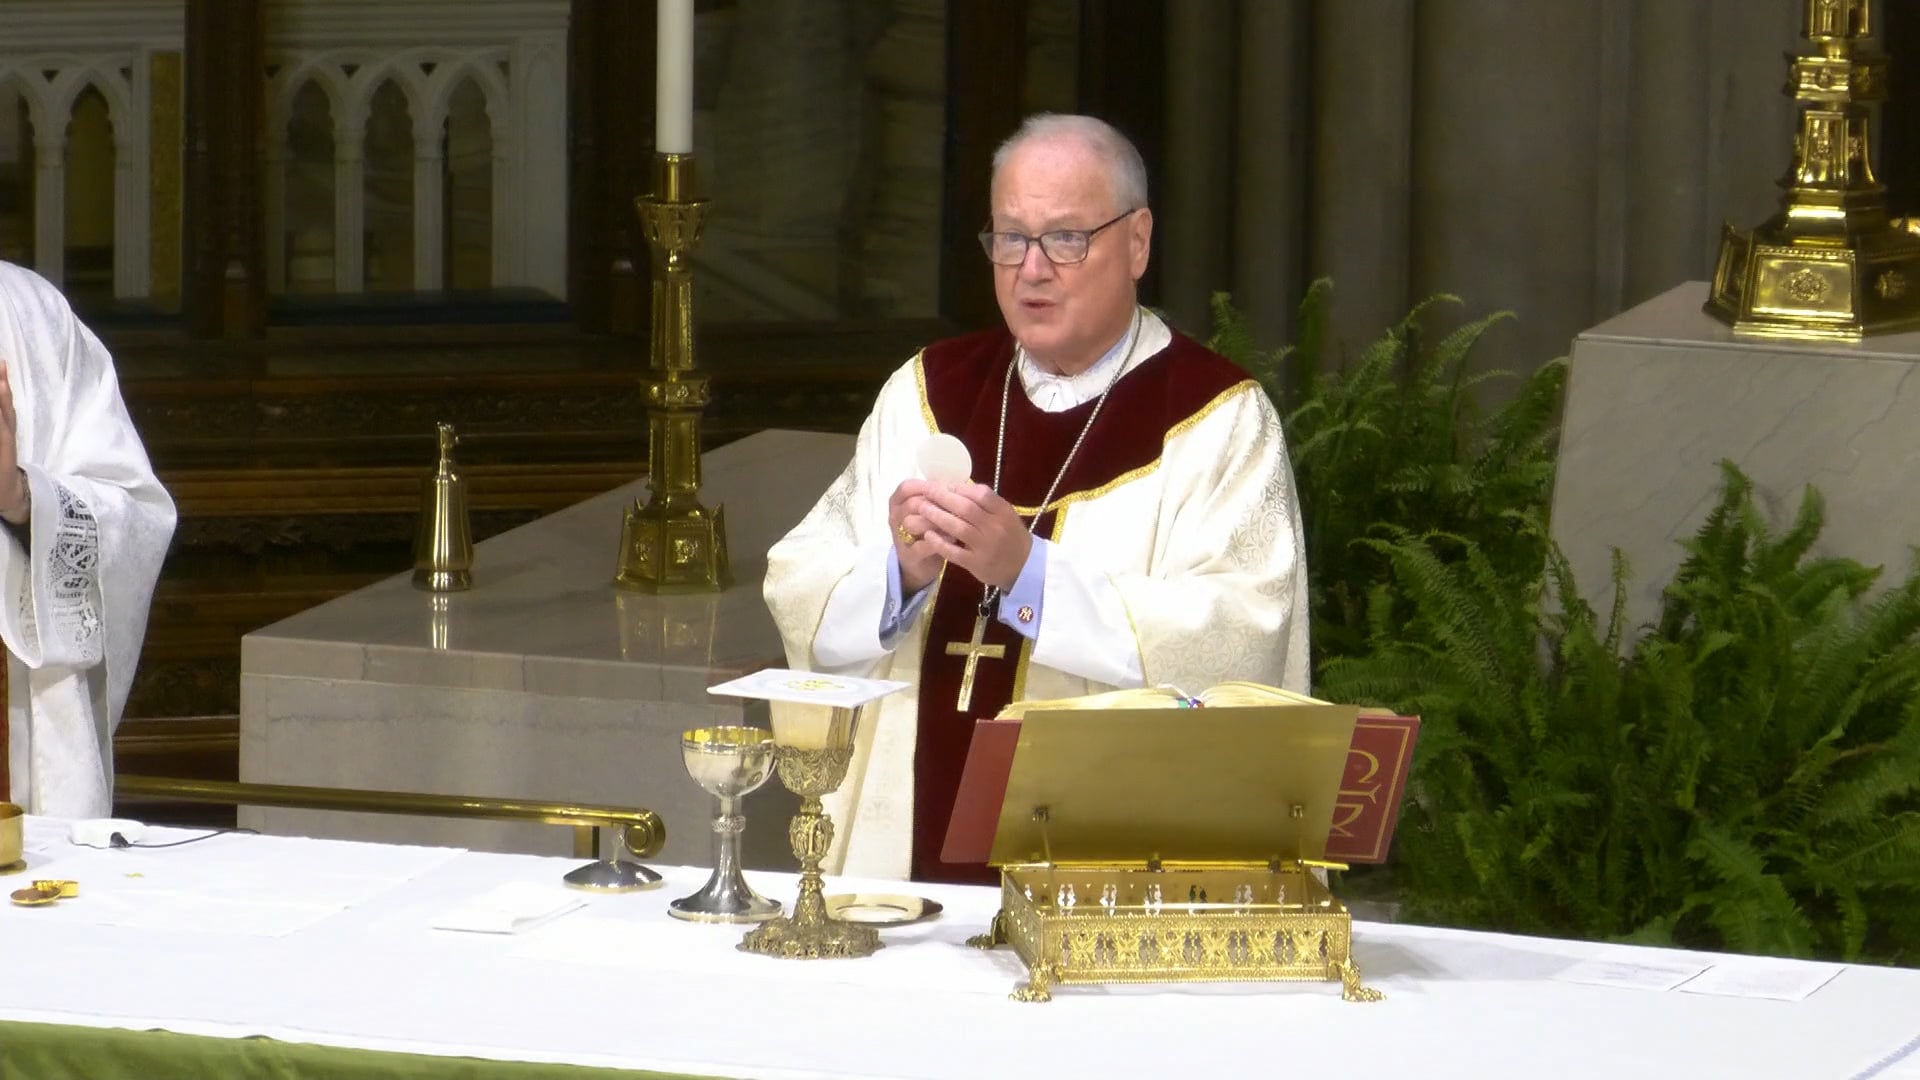 Mass from St. Patrick's Cathedral - September 22, 2022